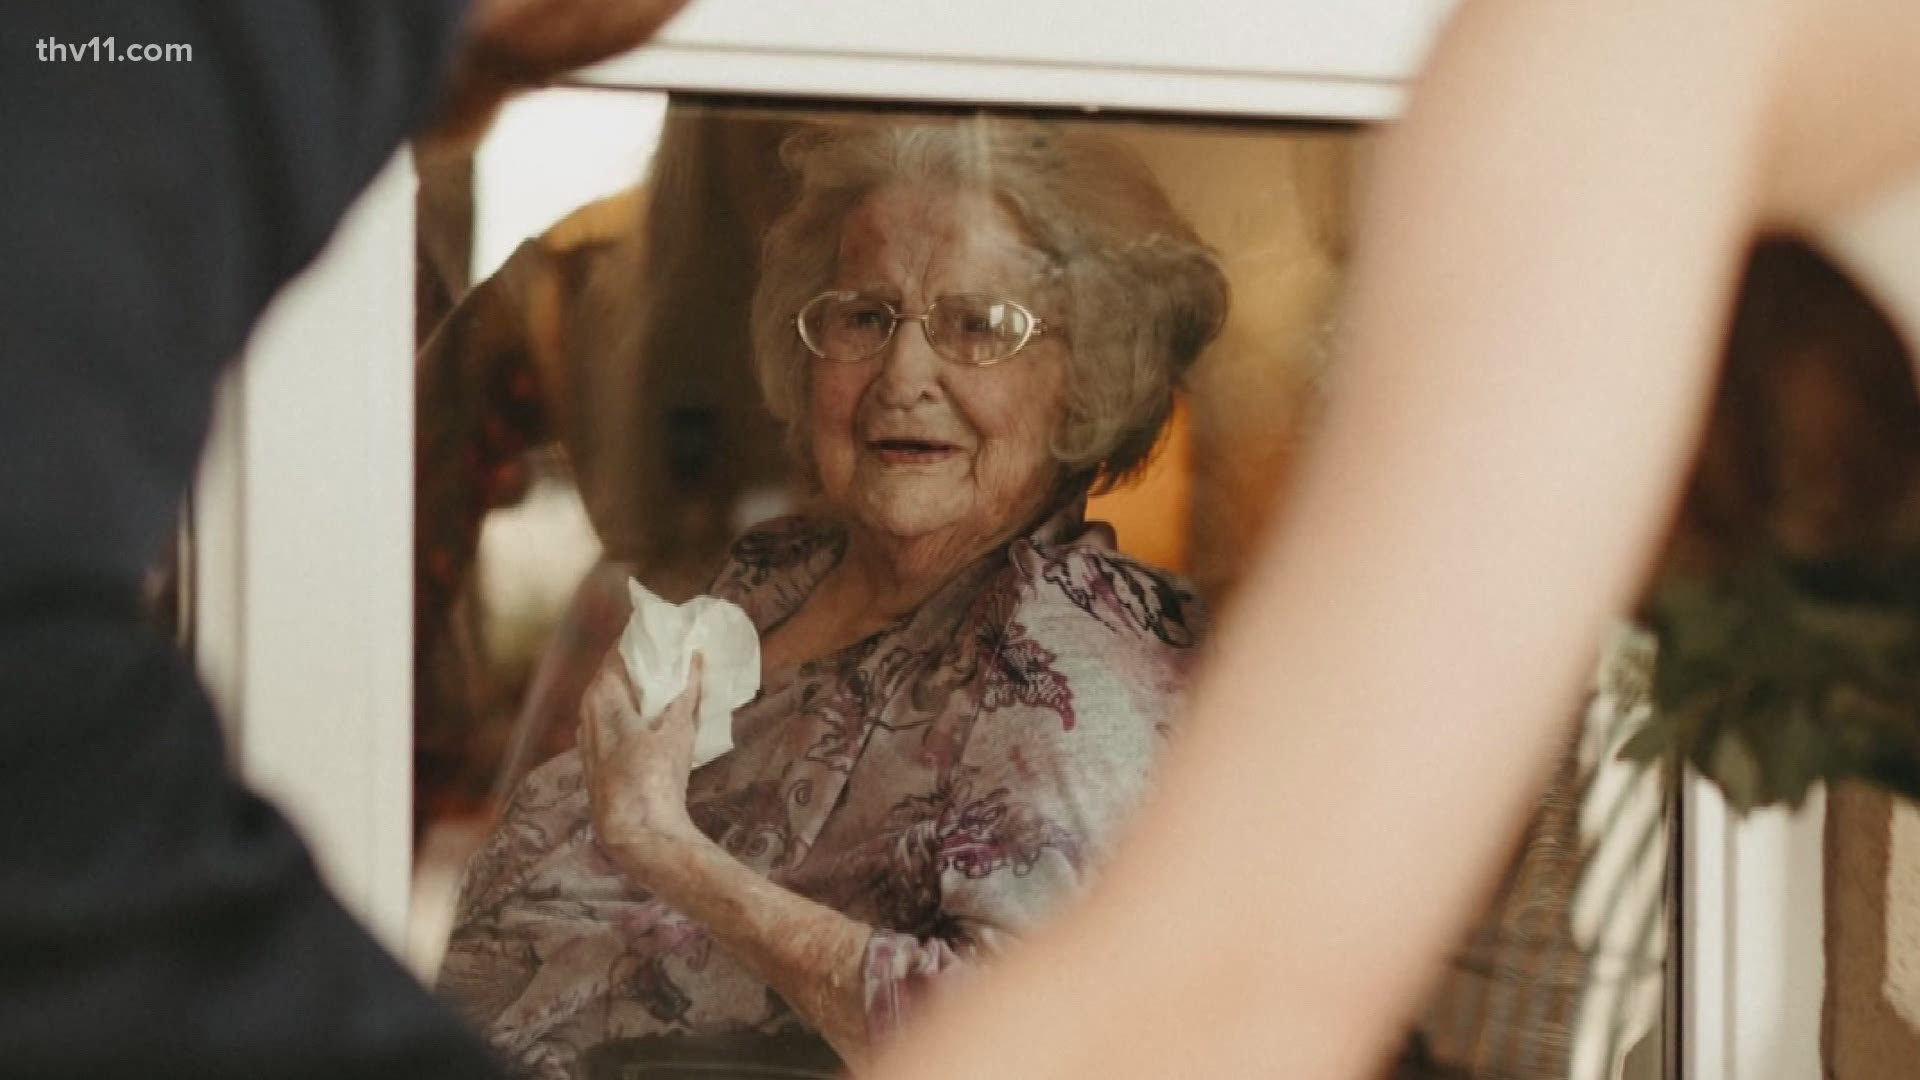 Clay and Megan knew their wedding would be different due to COVID-19, that's why they decided to bring the wedding reception to his grandmother's nursing home window